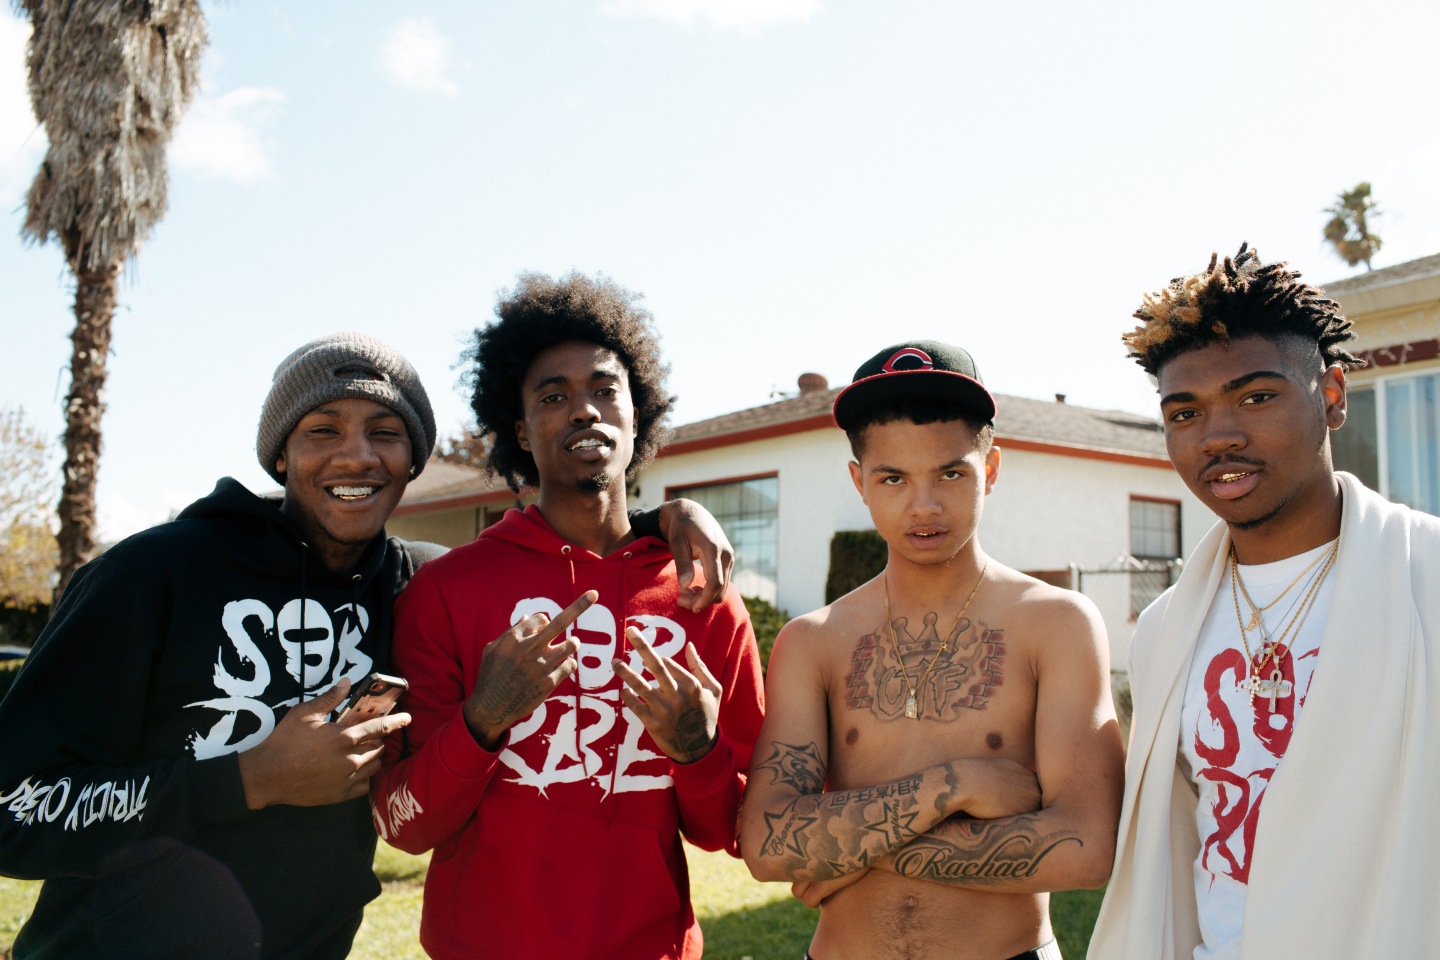 A Raw Conversation With SOB x RBE, The Vallejo Boys Setting The Bay On Fire